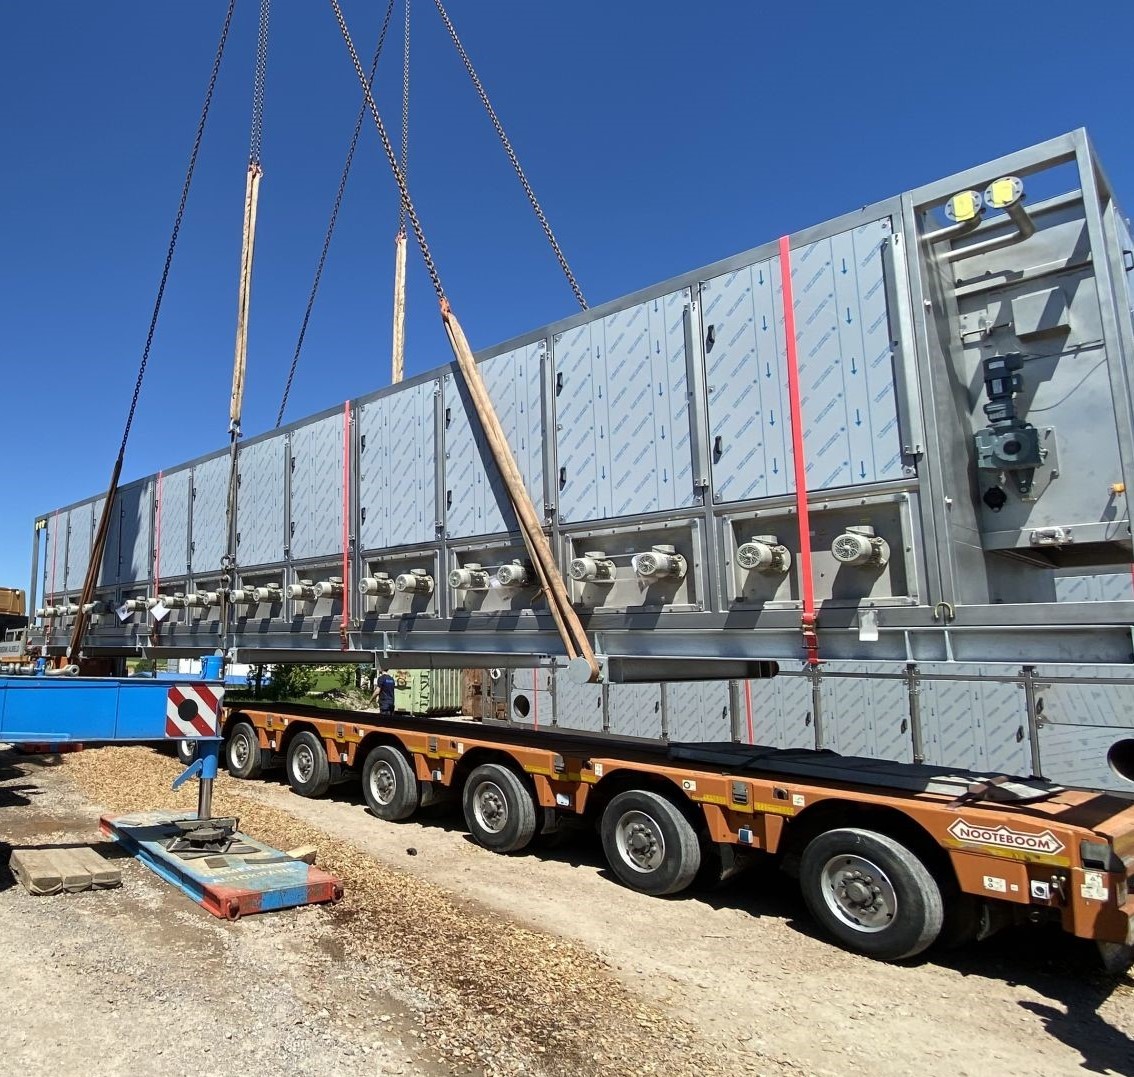 The 34 tonne dryers are on their way to Logan